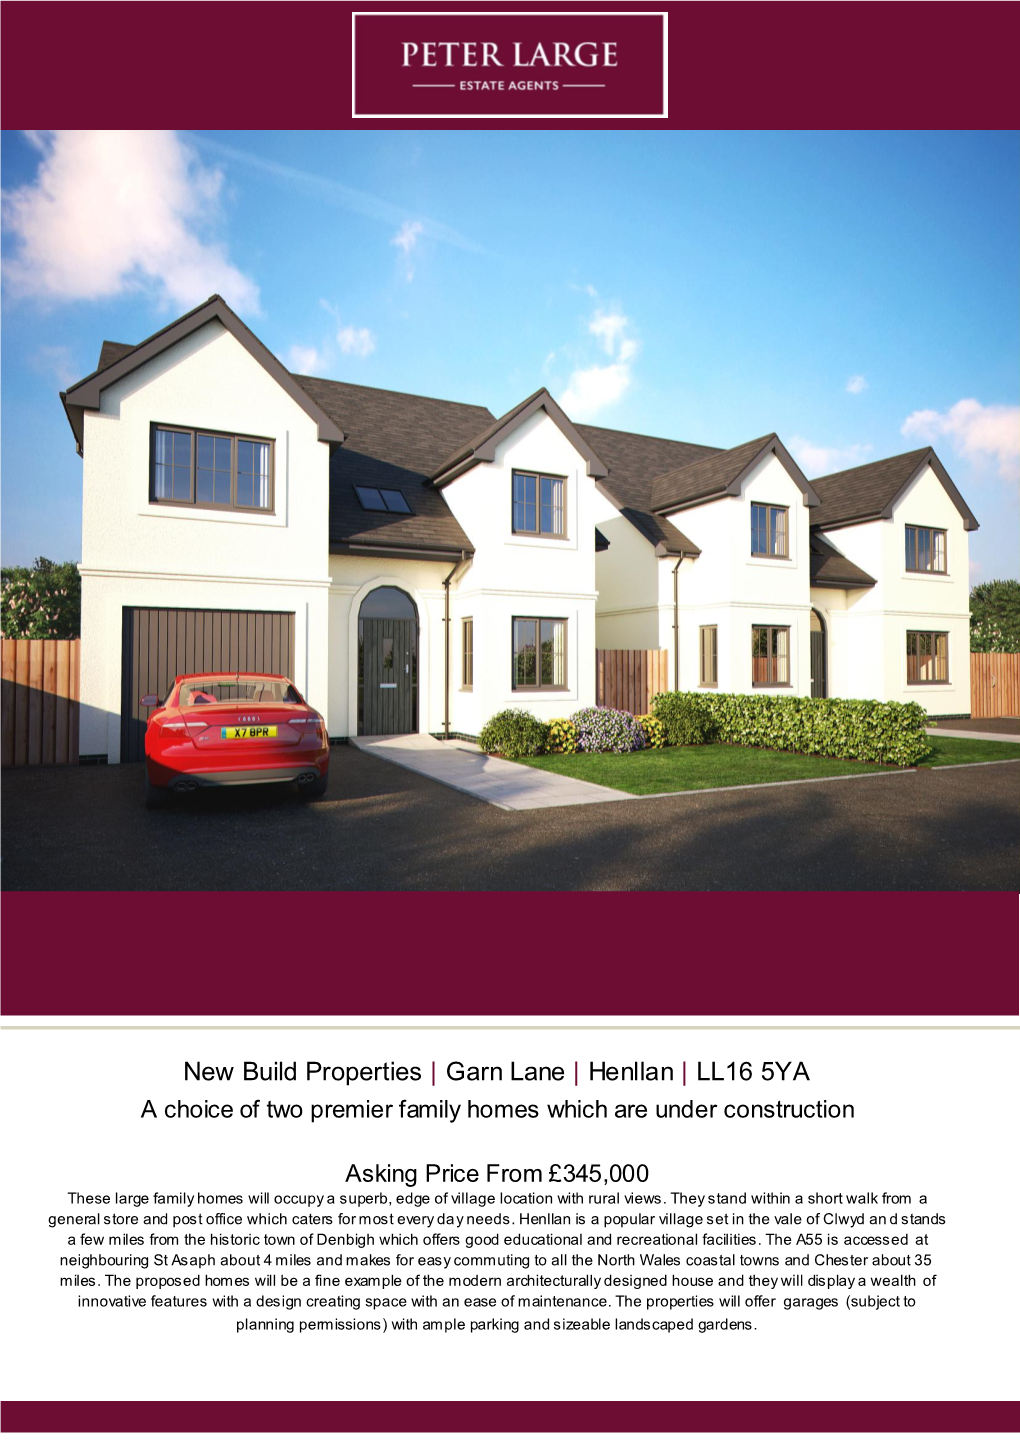 Henllan | LL16 5YA a Choice of Two Premier Family Homes Which Are Under Construction